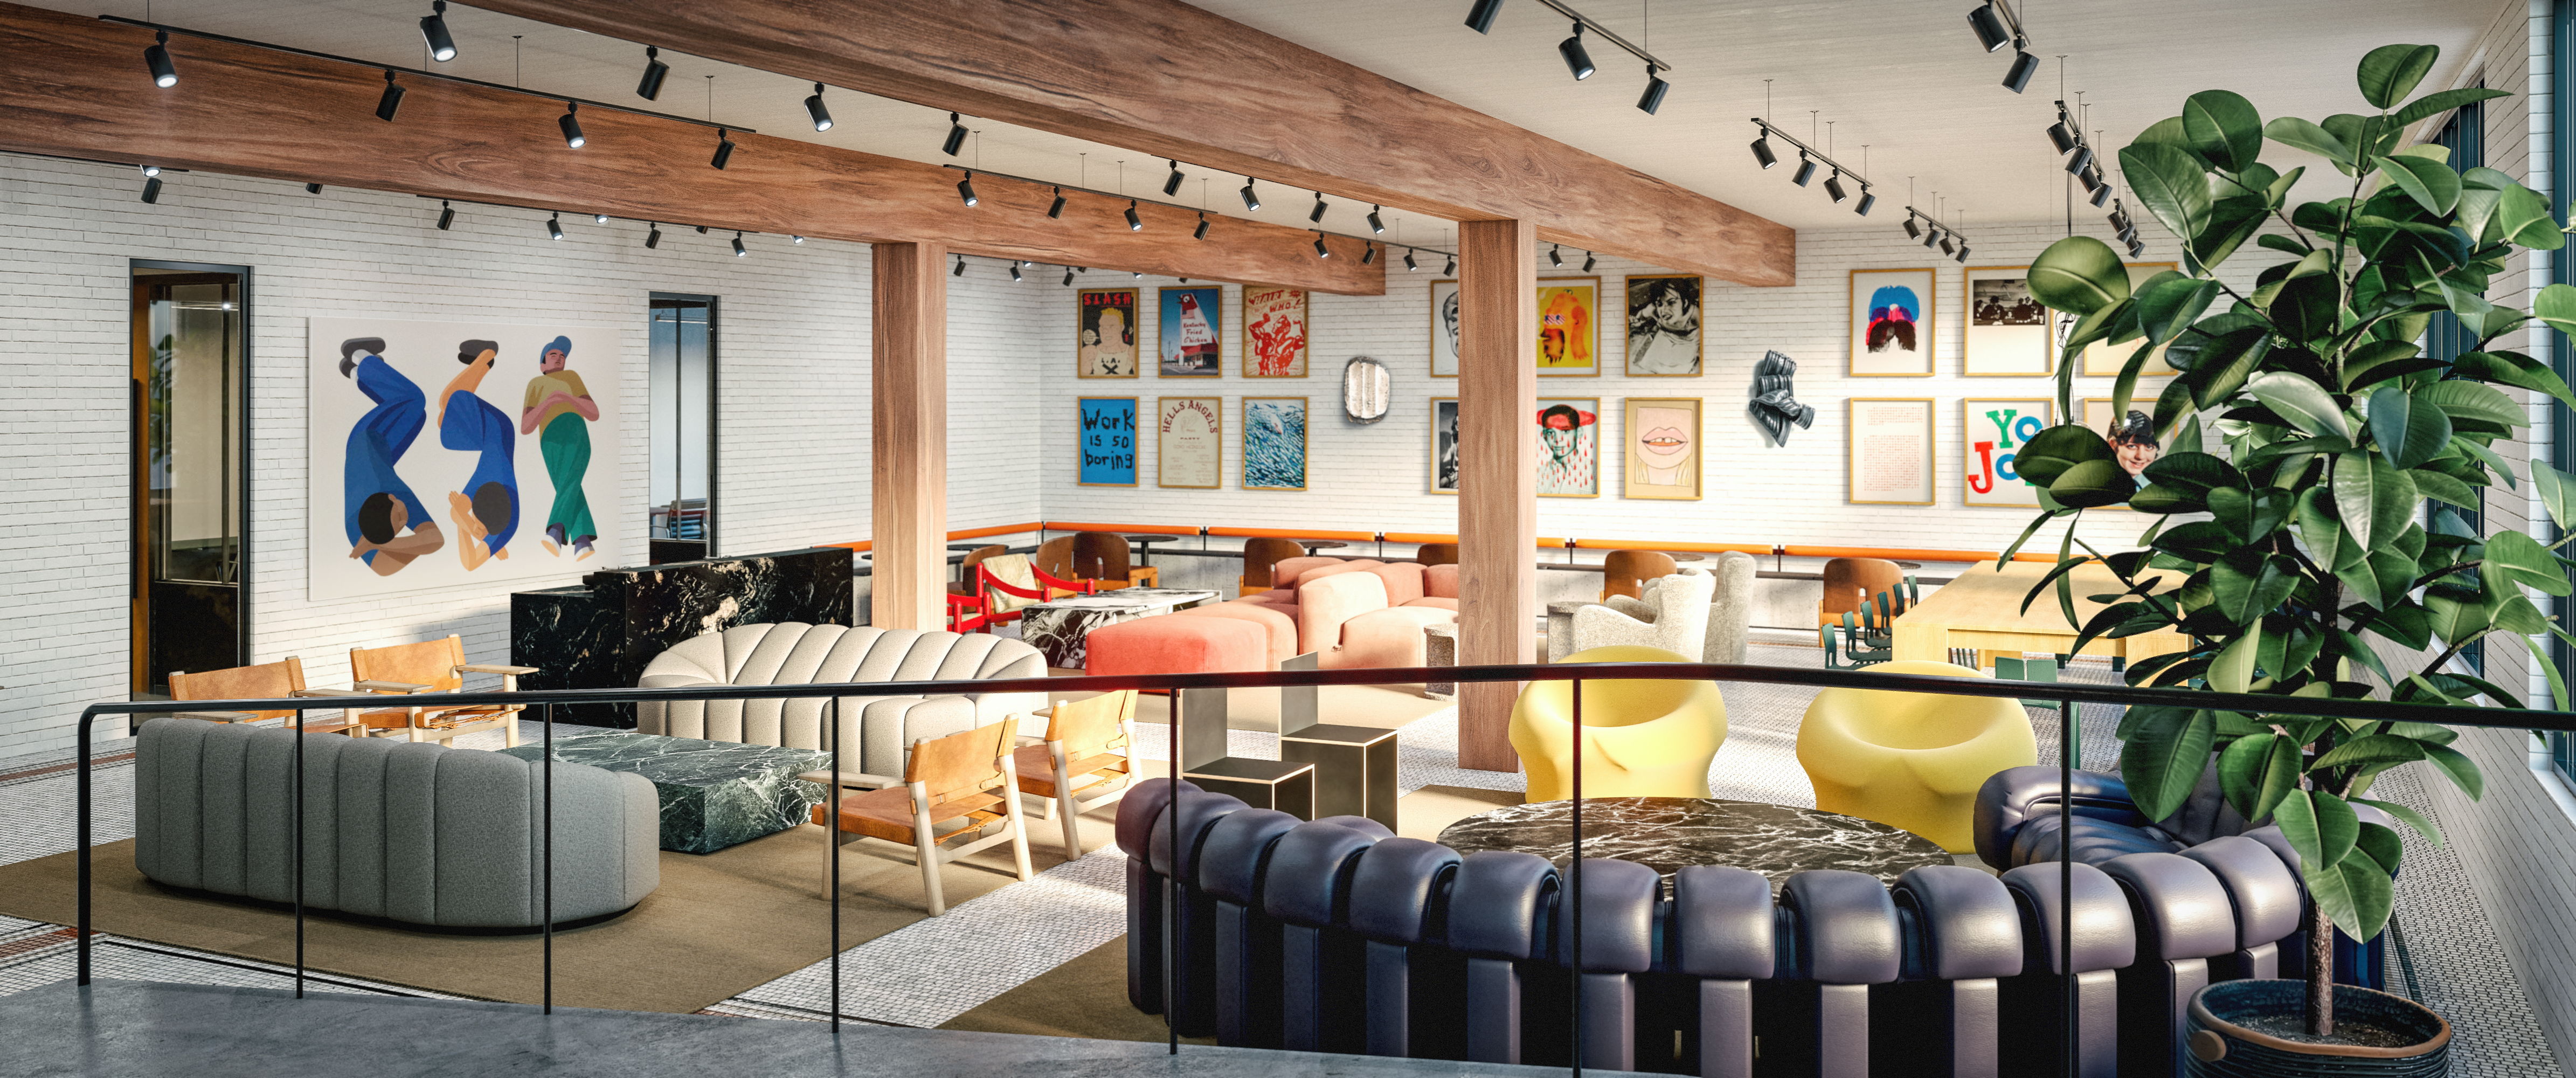 East Room on Claremont Street will feature signature lounge areas (rendering).